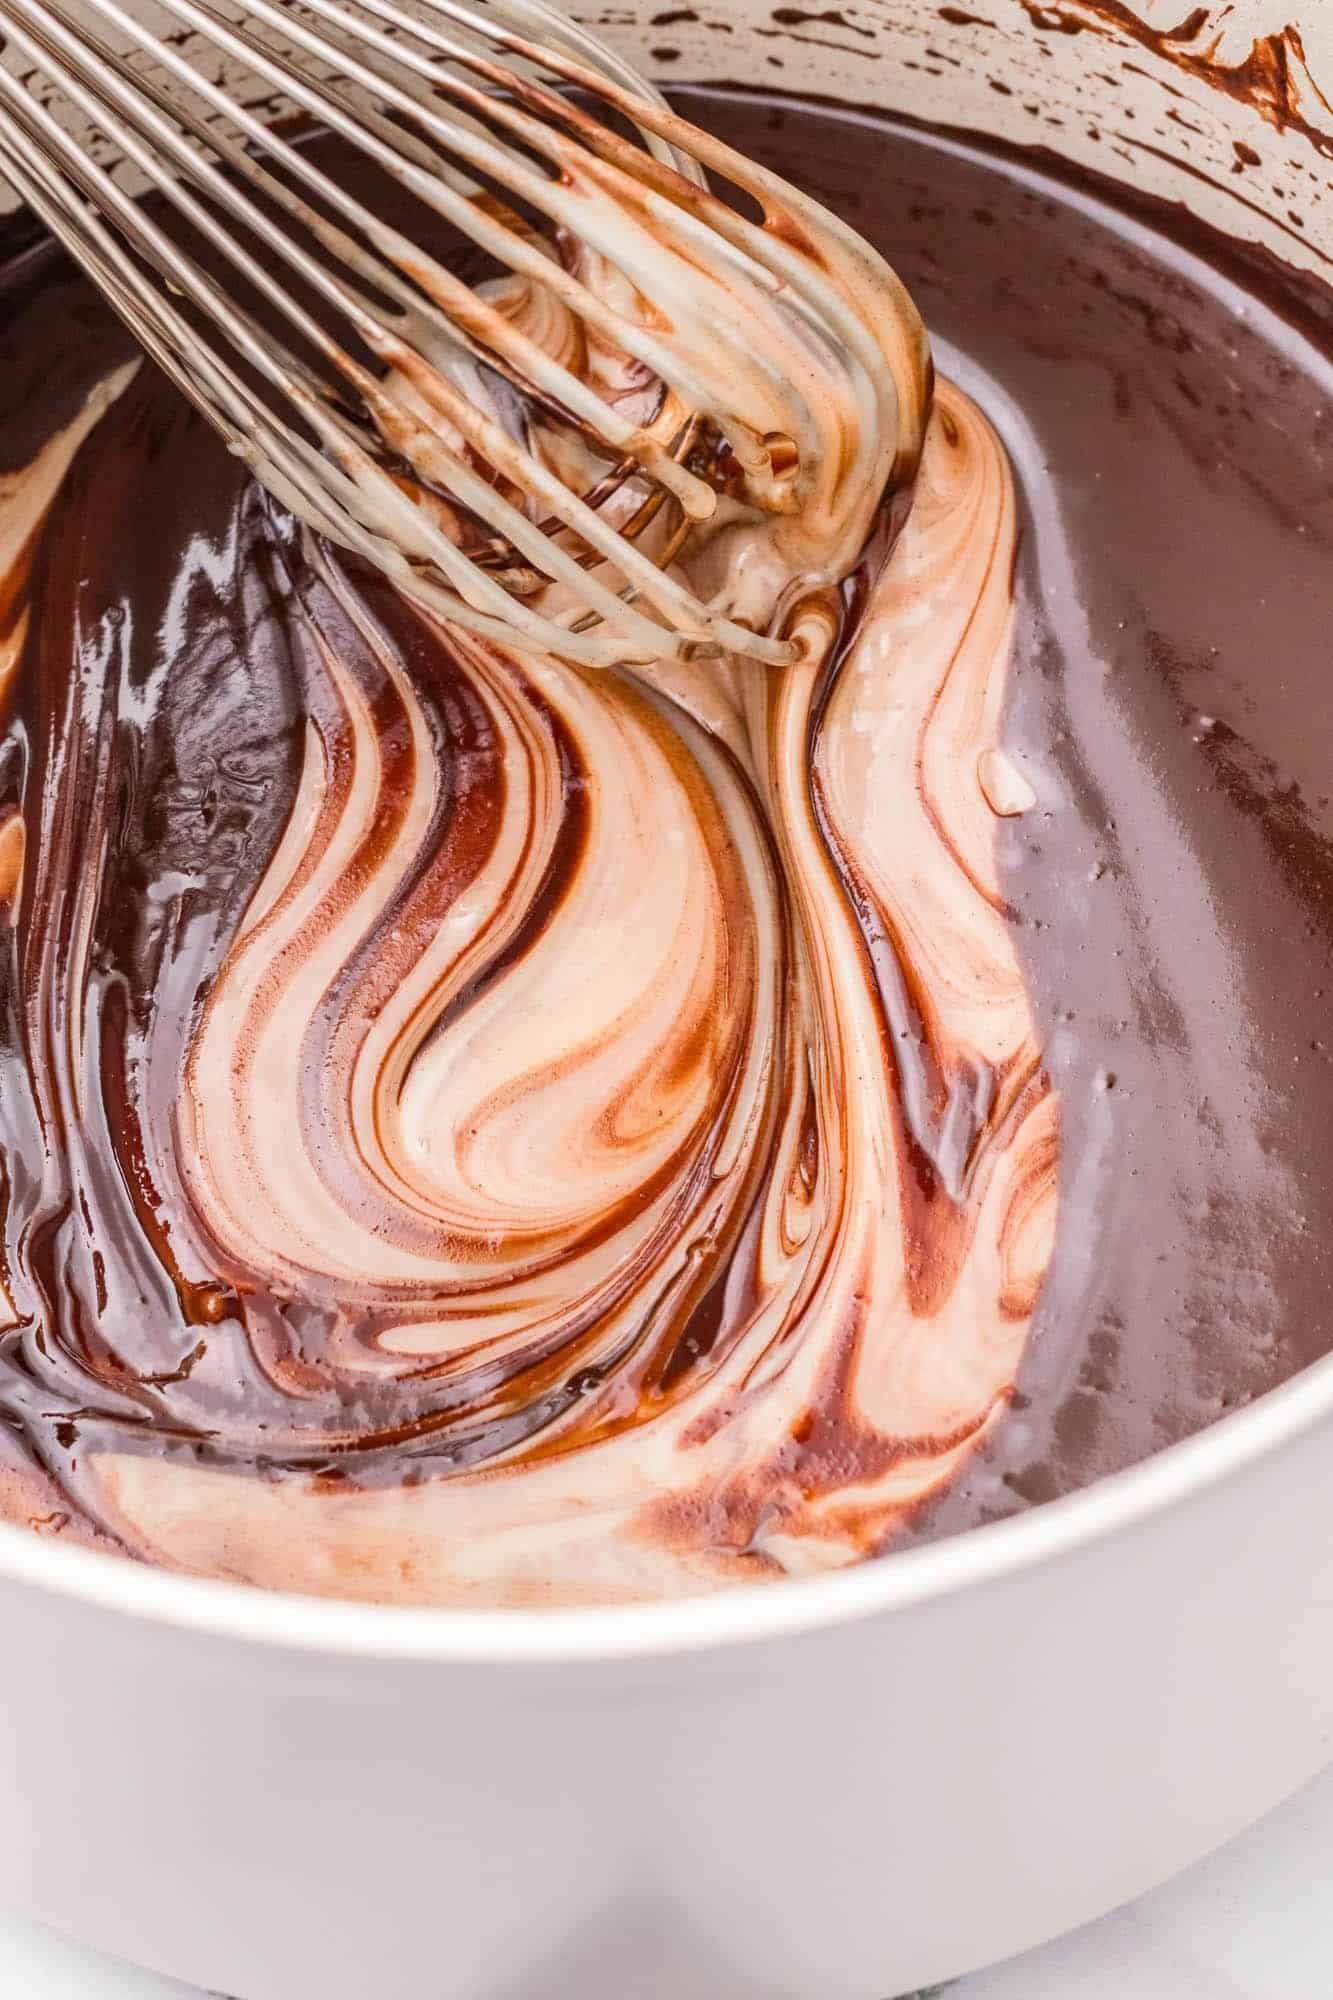 sweetened condensed milk whisked into chocolate.